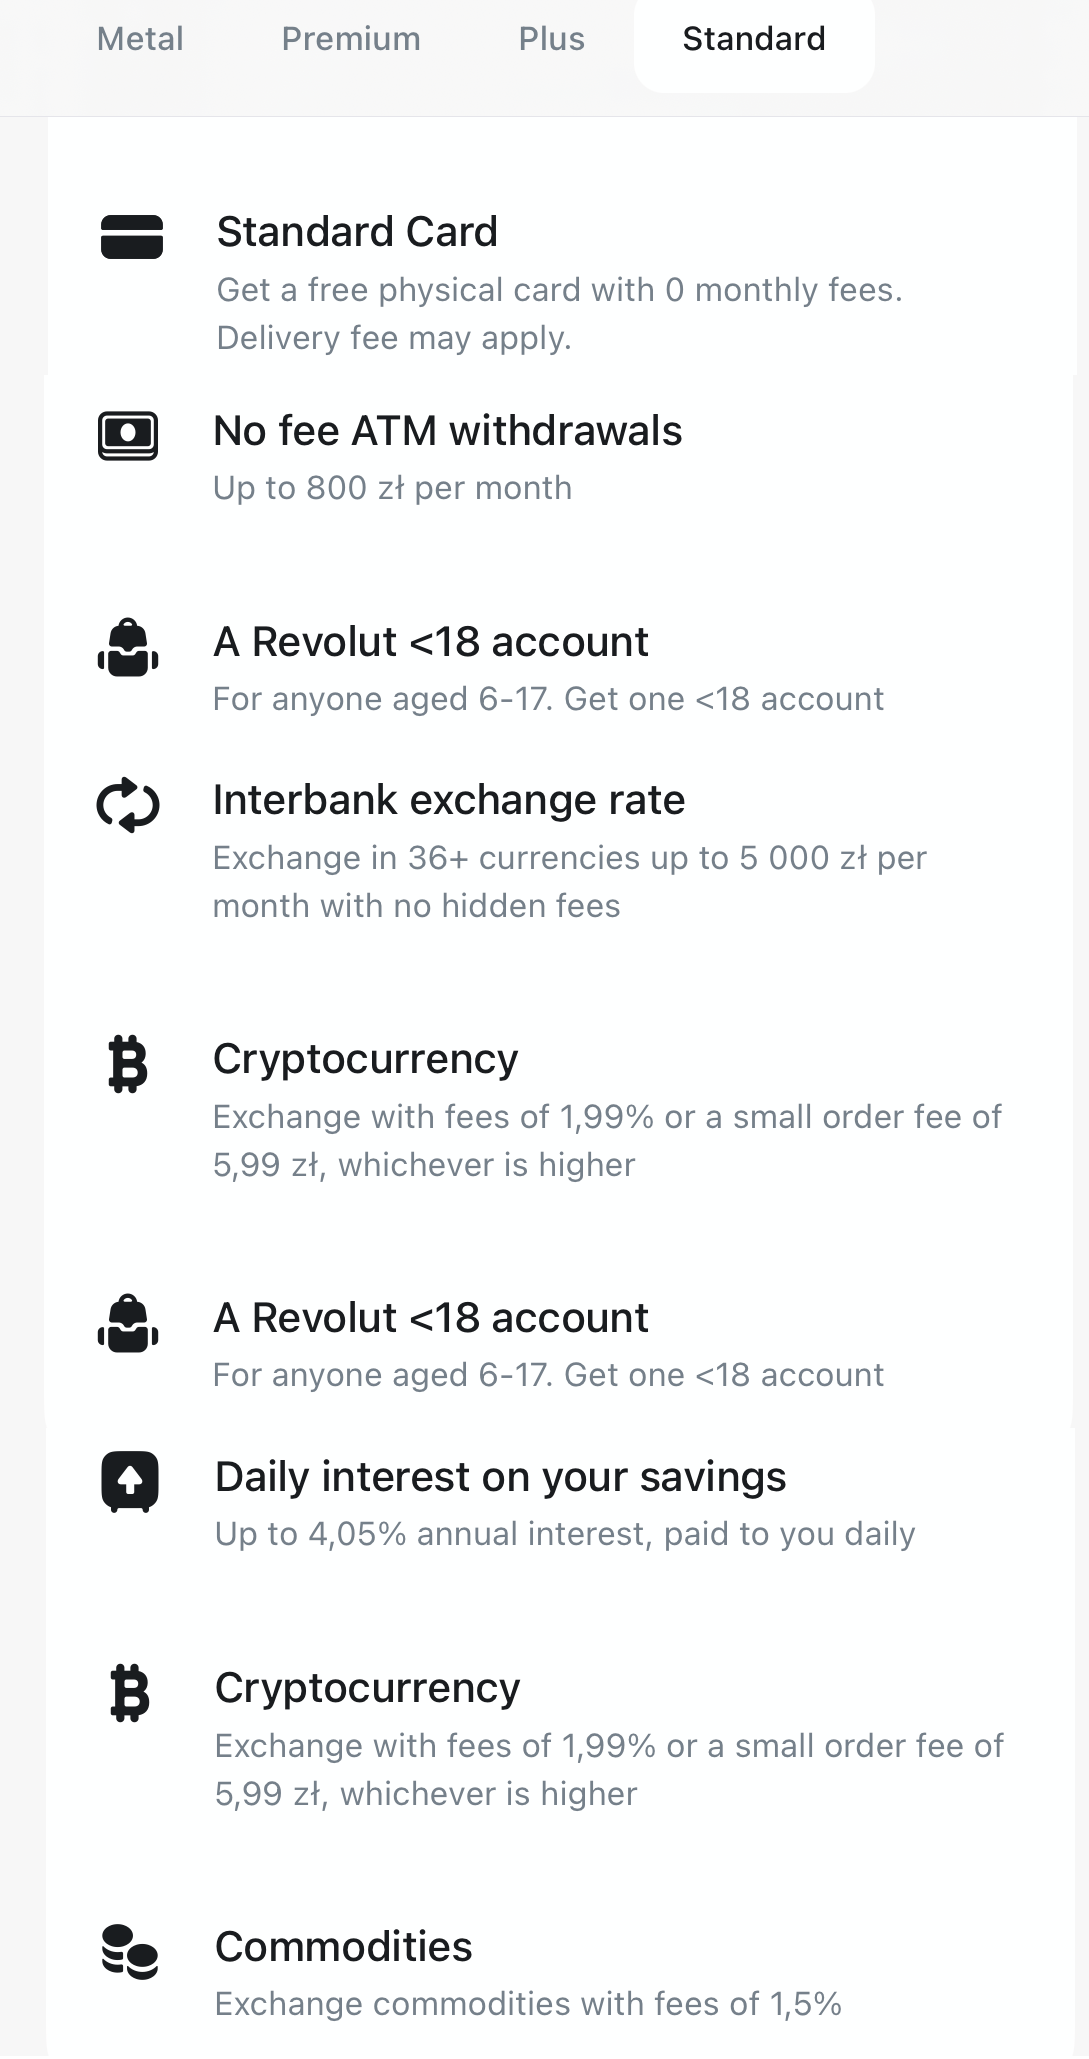 Some of free features of Revolut